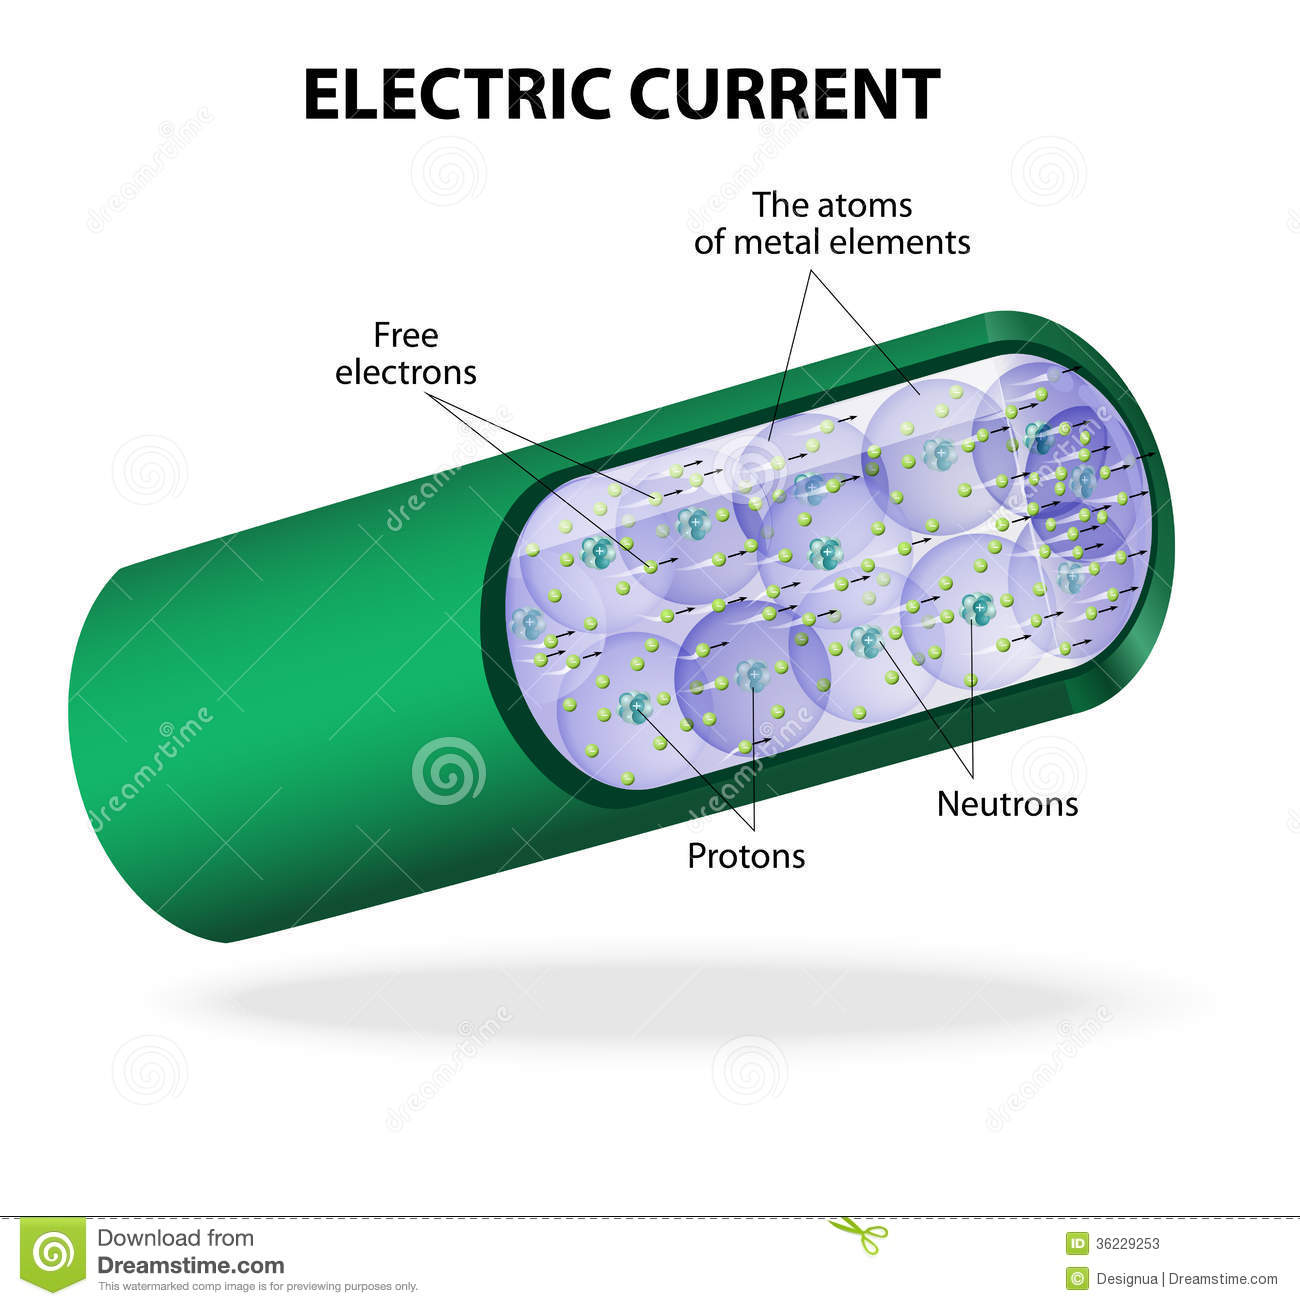 Electric Current Is The Flow Of Electrons  In Electric Circuits This    